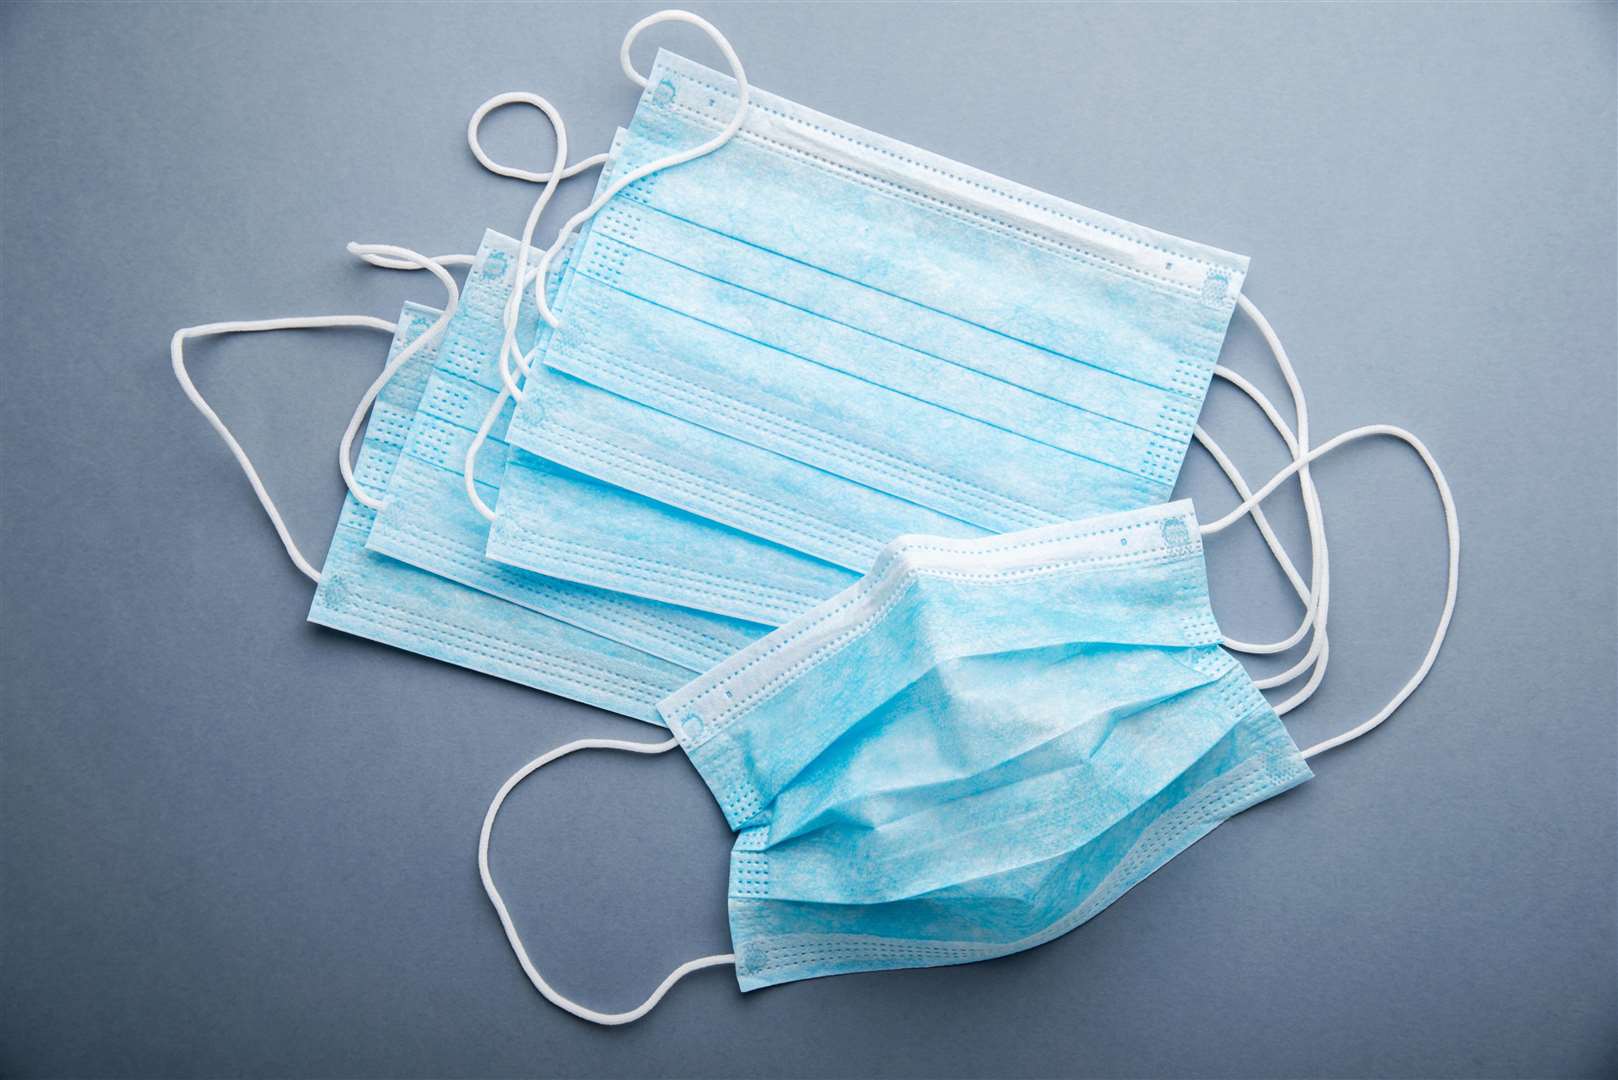 Staff, patients and visitors in all hospital and care settings should now use fluid resistant surgical masks.